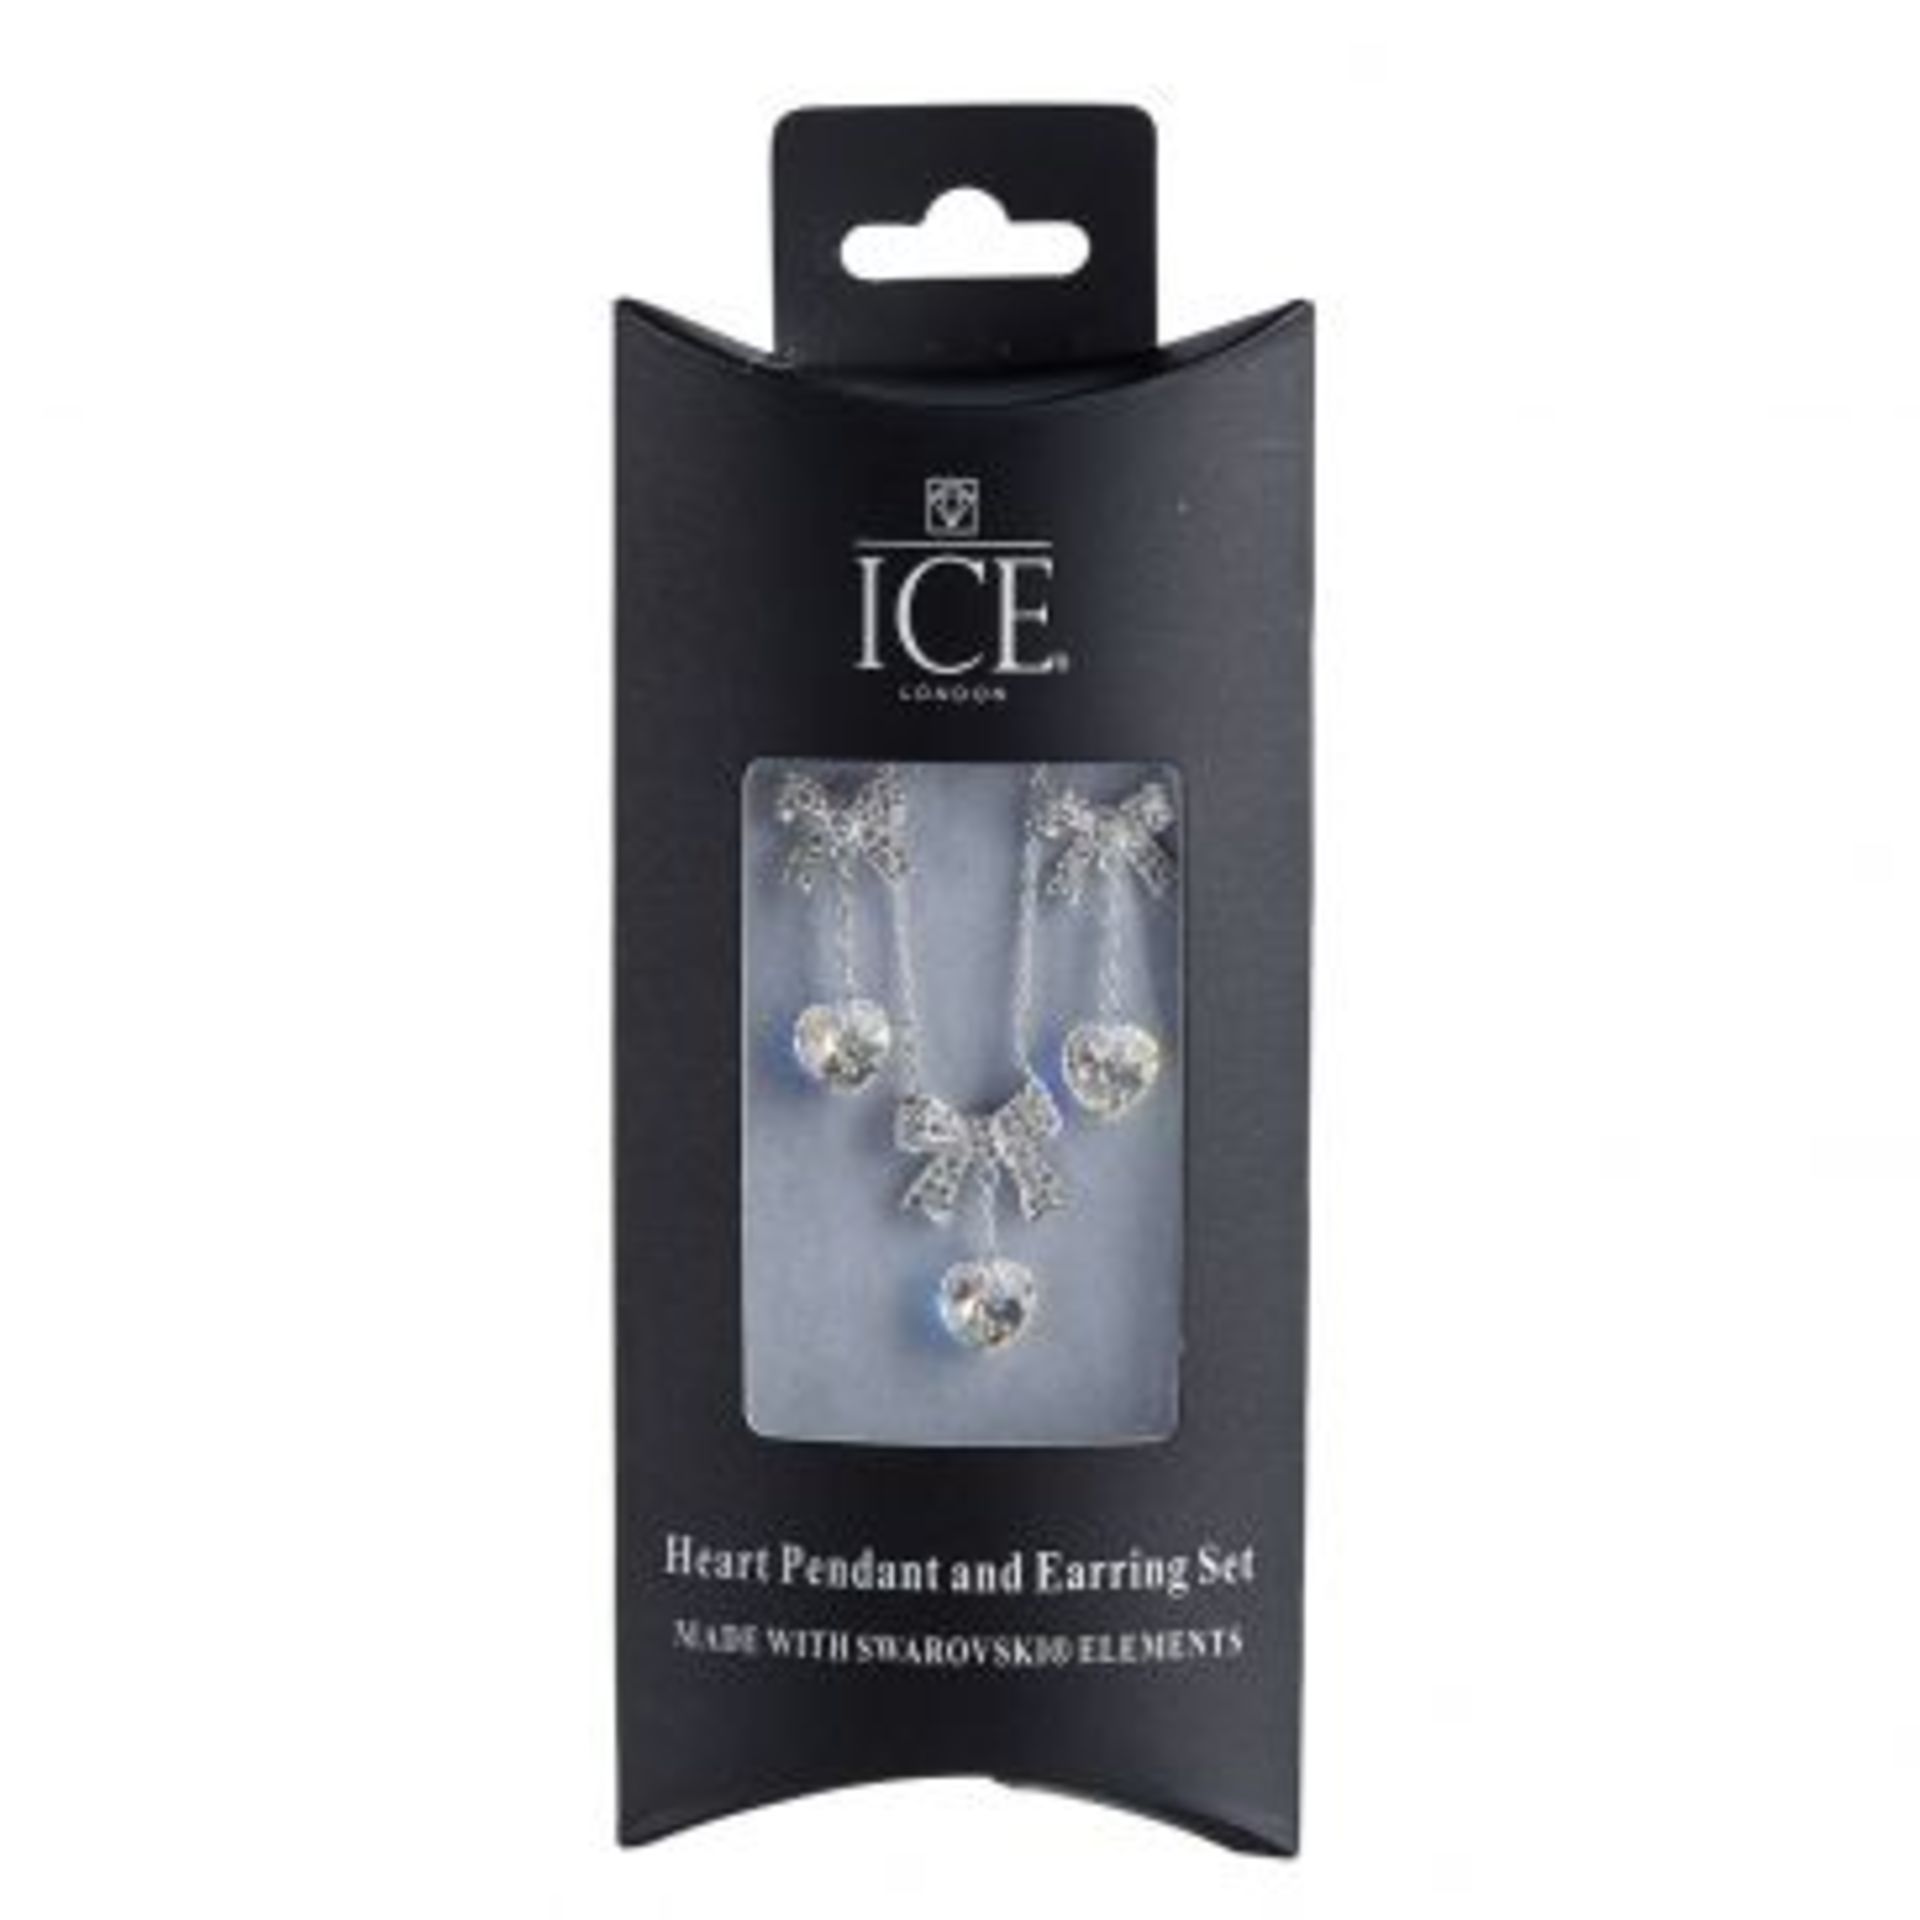 1 x HEART PENDANT AND EARRING SET By ICE London - EGJ-9900 - Silver-tone Curb Chain Adorned With